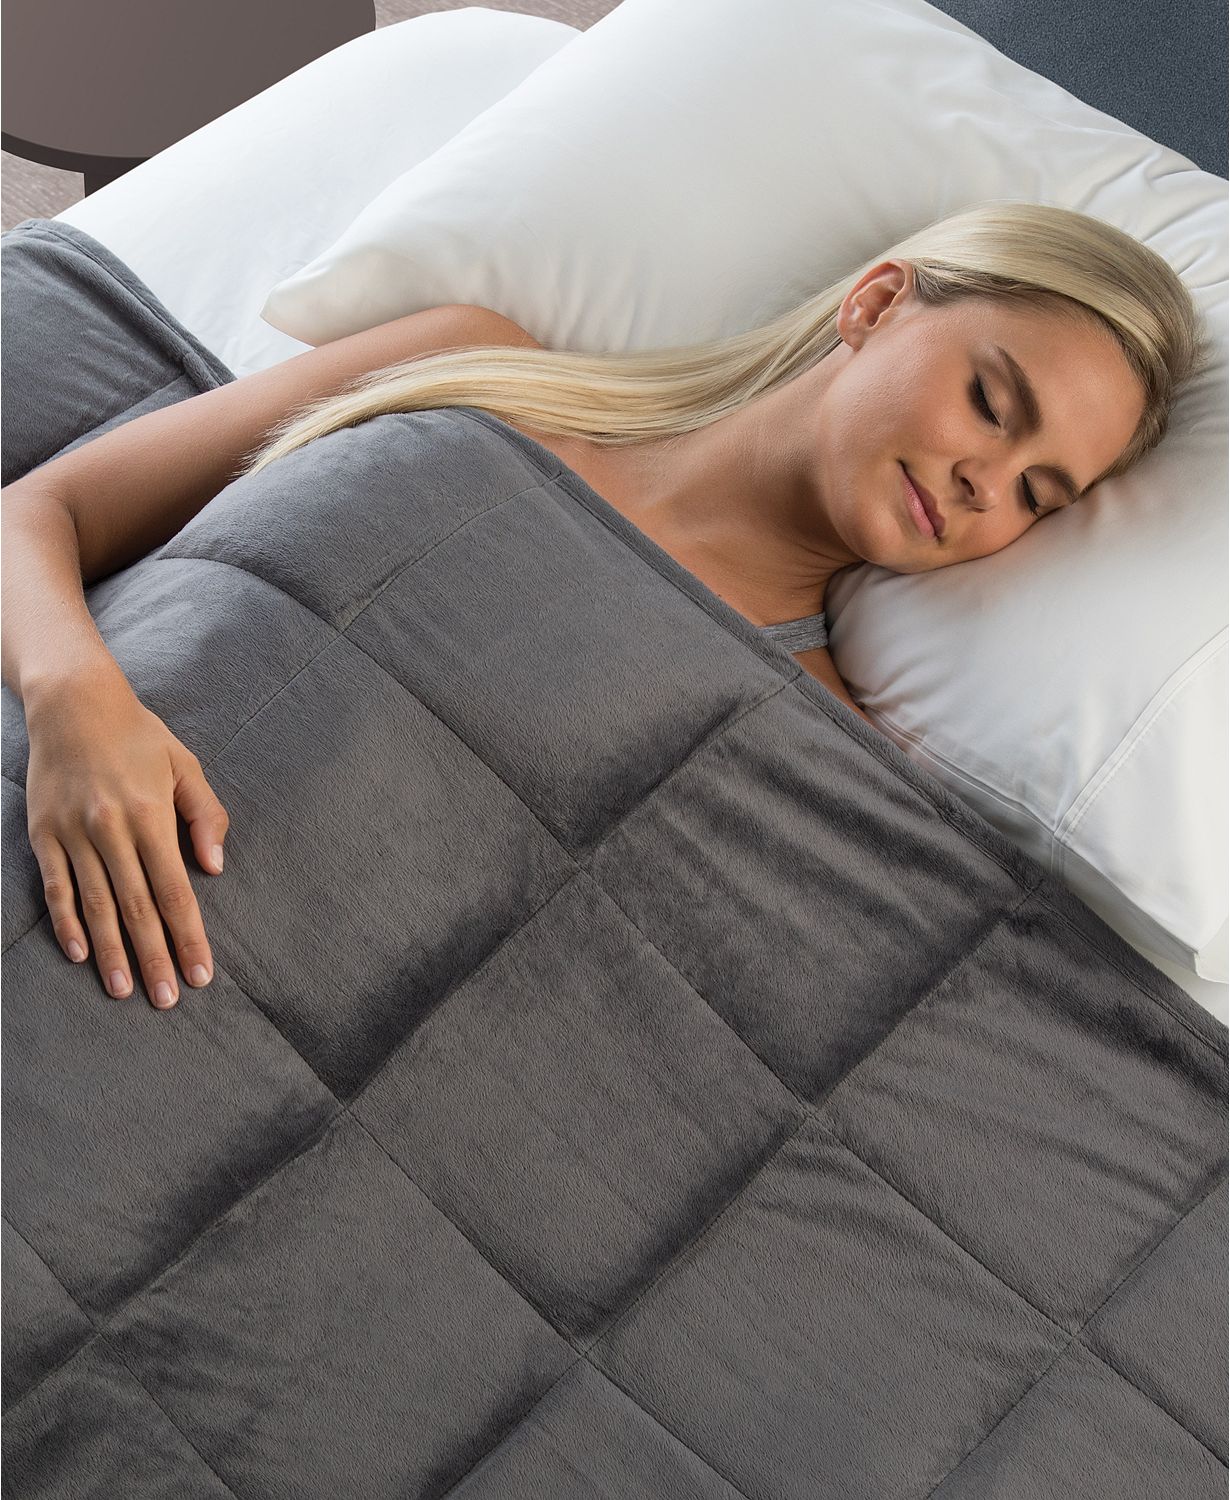 Macy’s: Sharper Image 10lb Weighted Blanket Only $79.99 | Money Saving